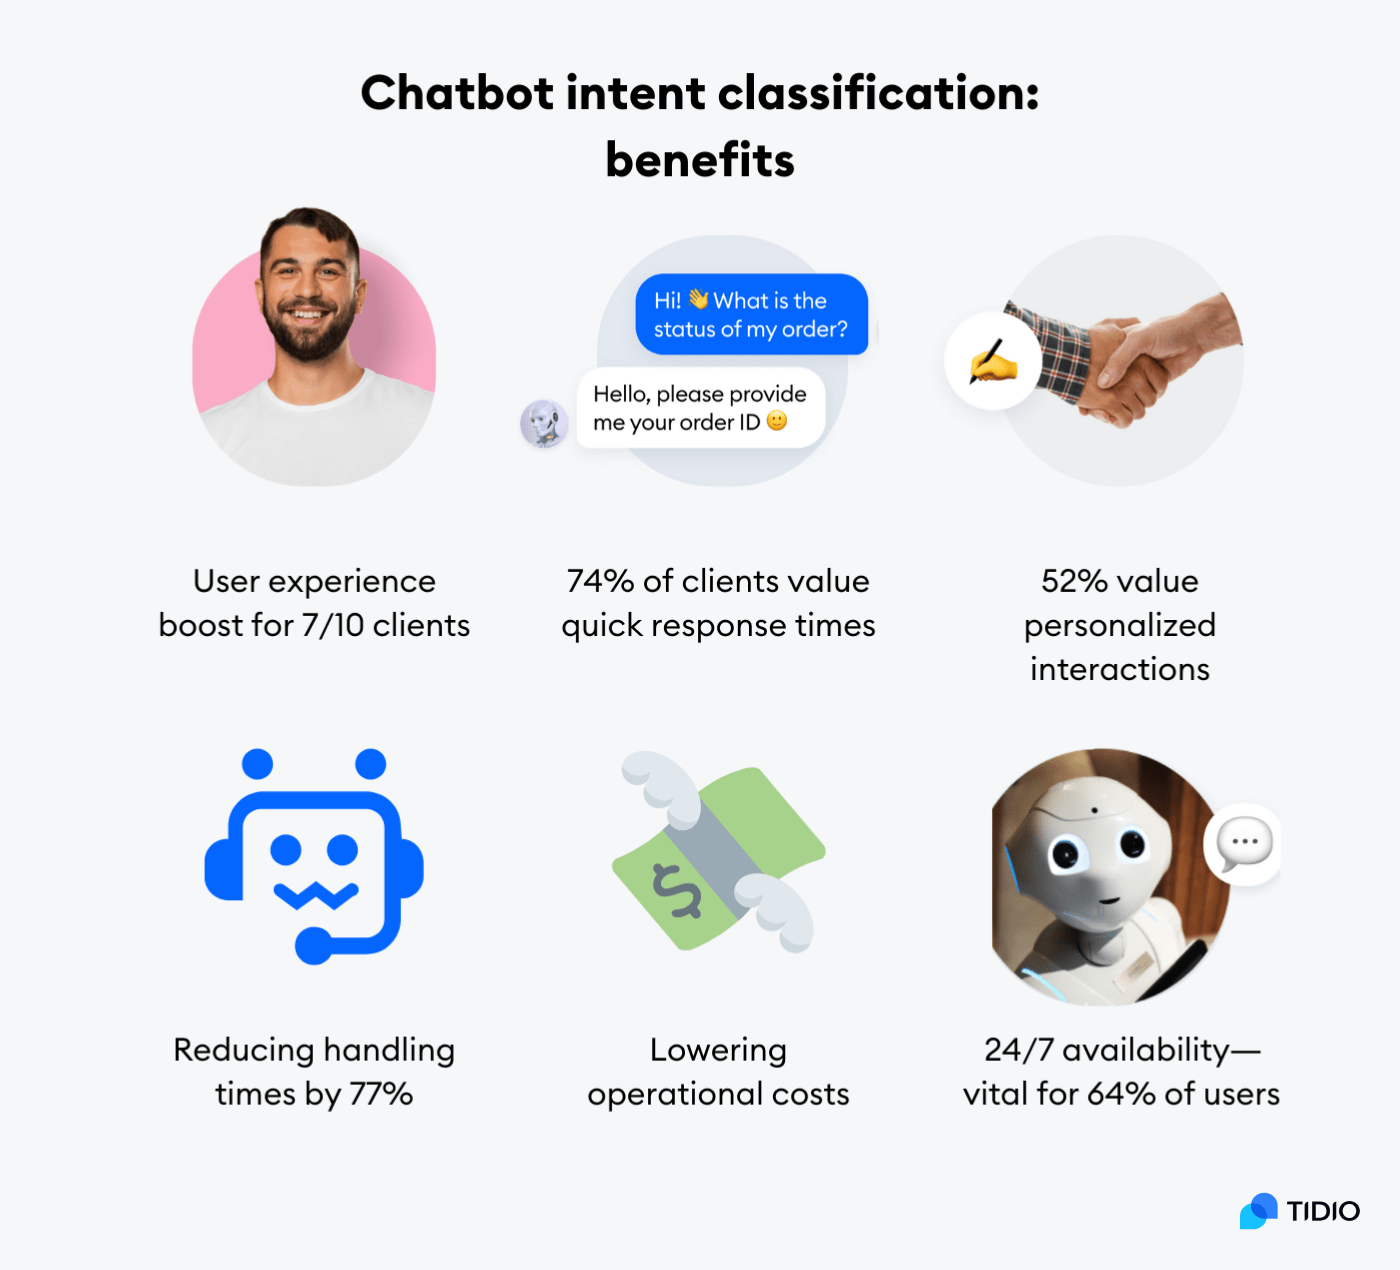 benefits of chatbot intent classification on image